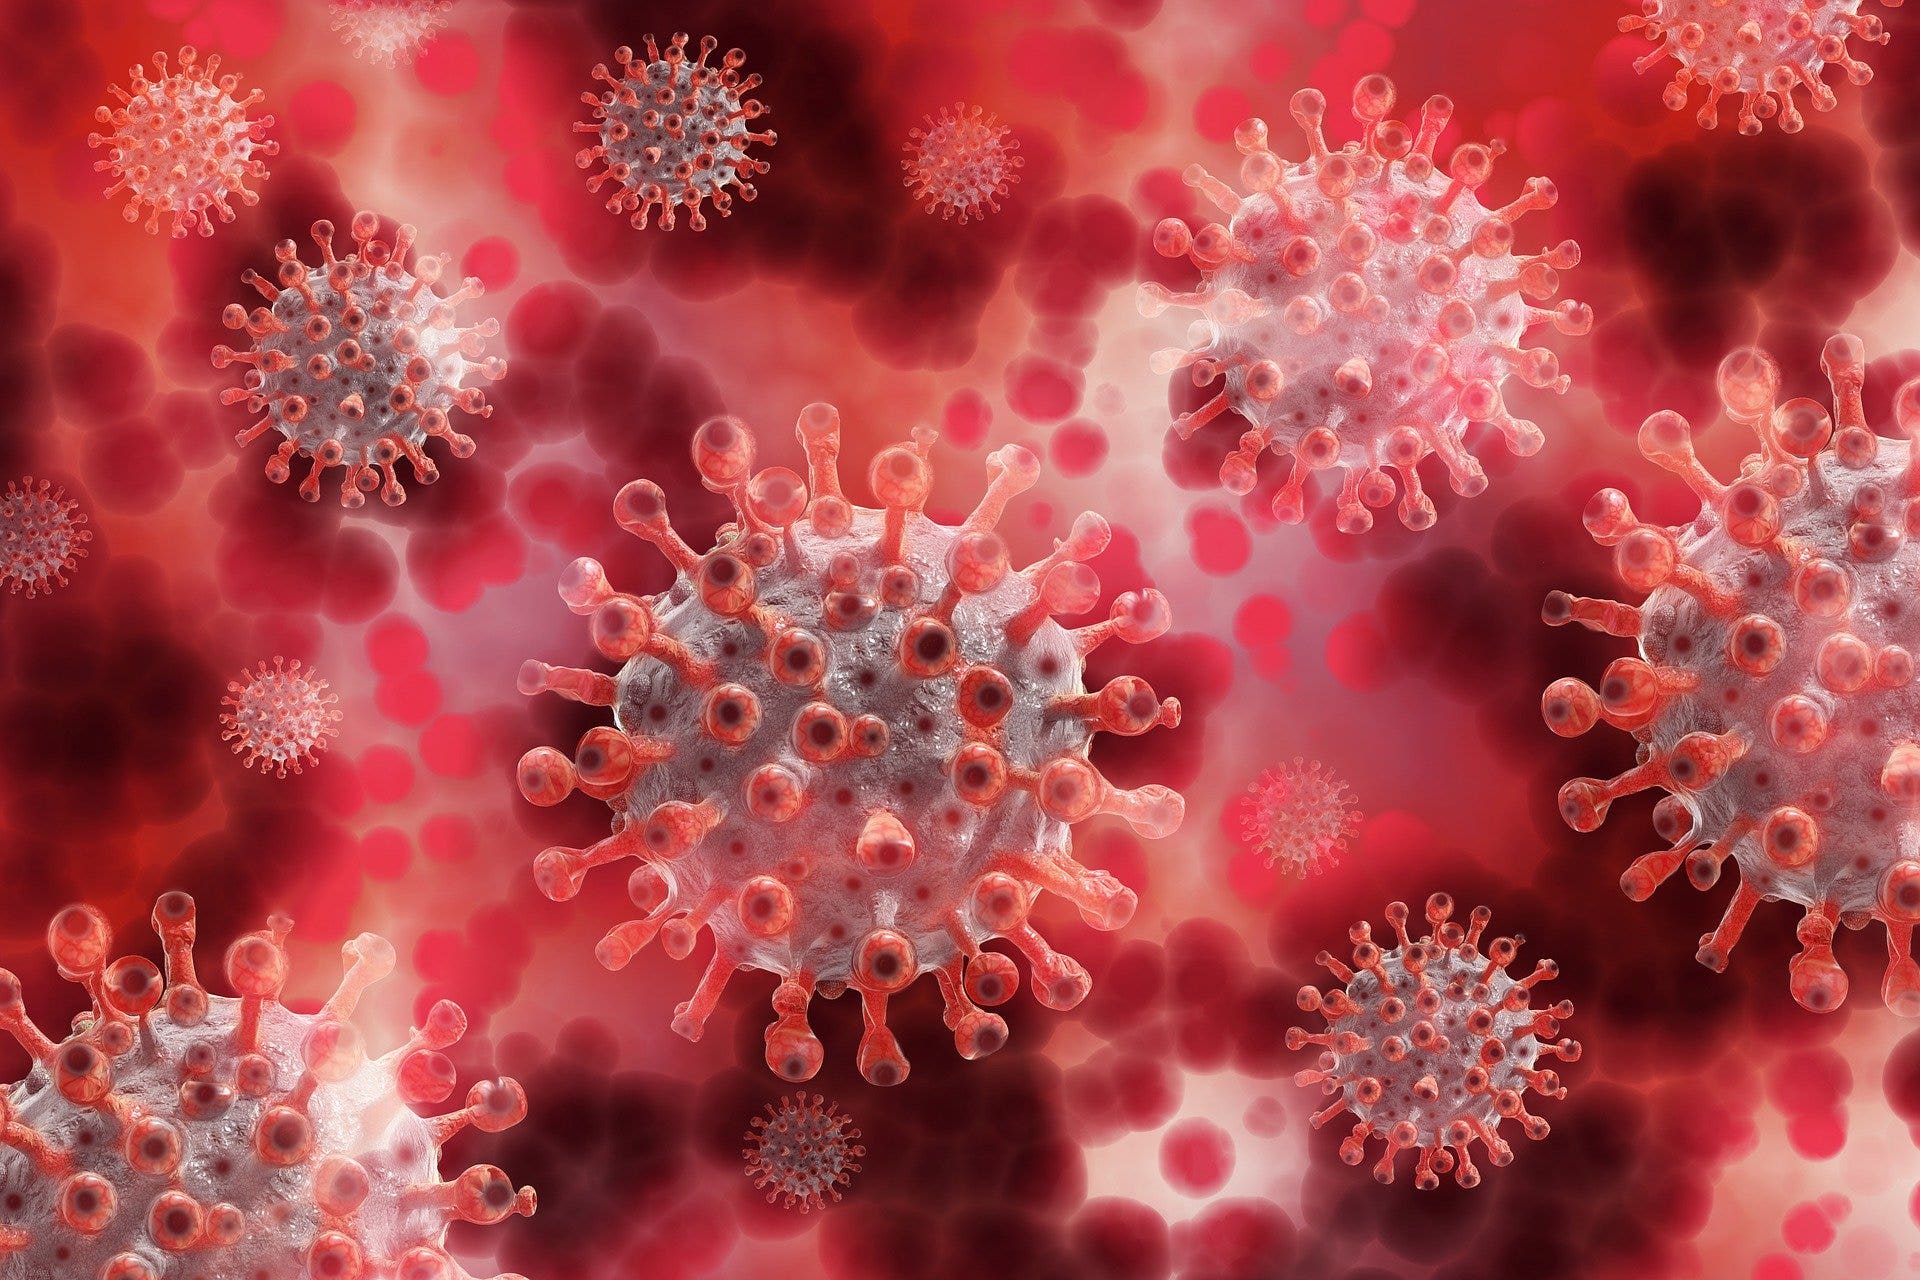 Moderna Will Start To Outrun Coronavirus Competition In 2021, Analyst Says